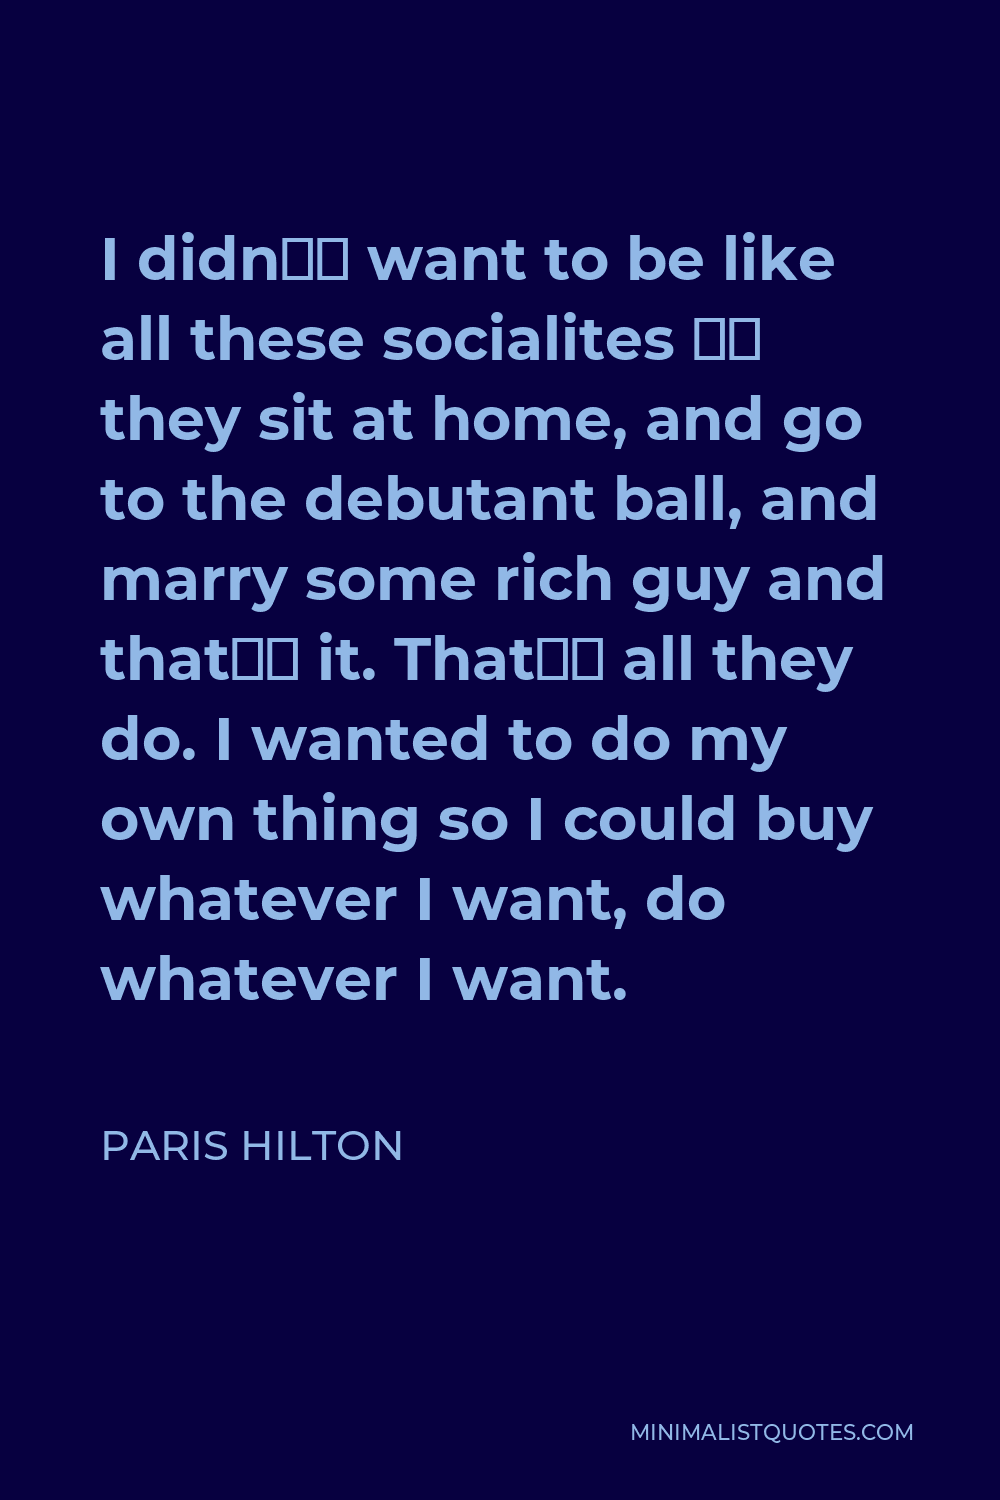 Paris Hilton Quote - I didn’t want to be like all these socialites – they sit at home, and go to the debutant ball, and marry some rich guy and that’s it. That’s all they do. I wanted to do my own thing so I could buy whatever I want, do whatever I want.